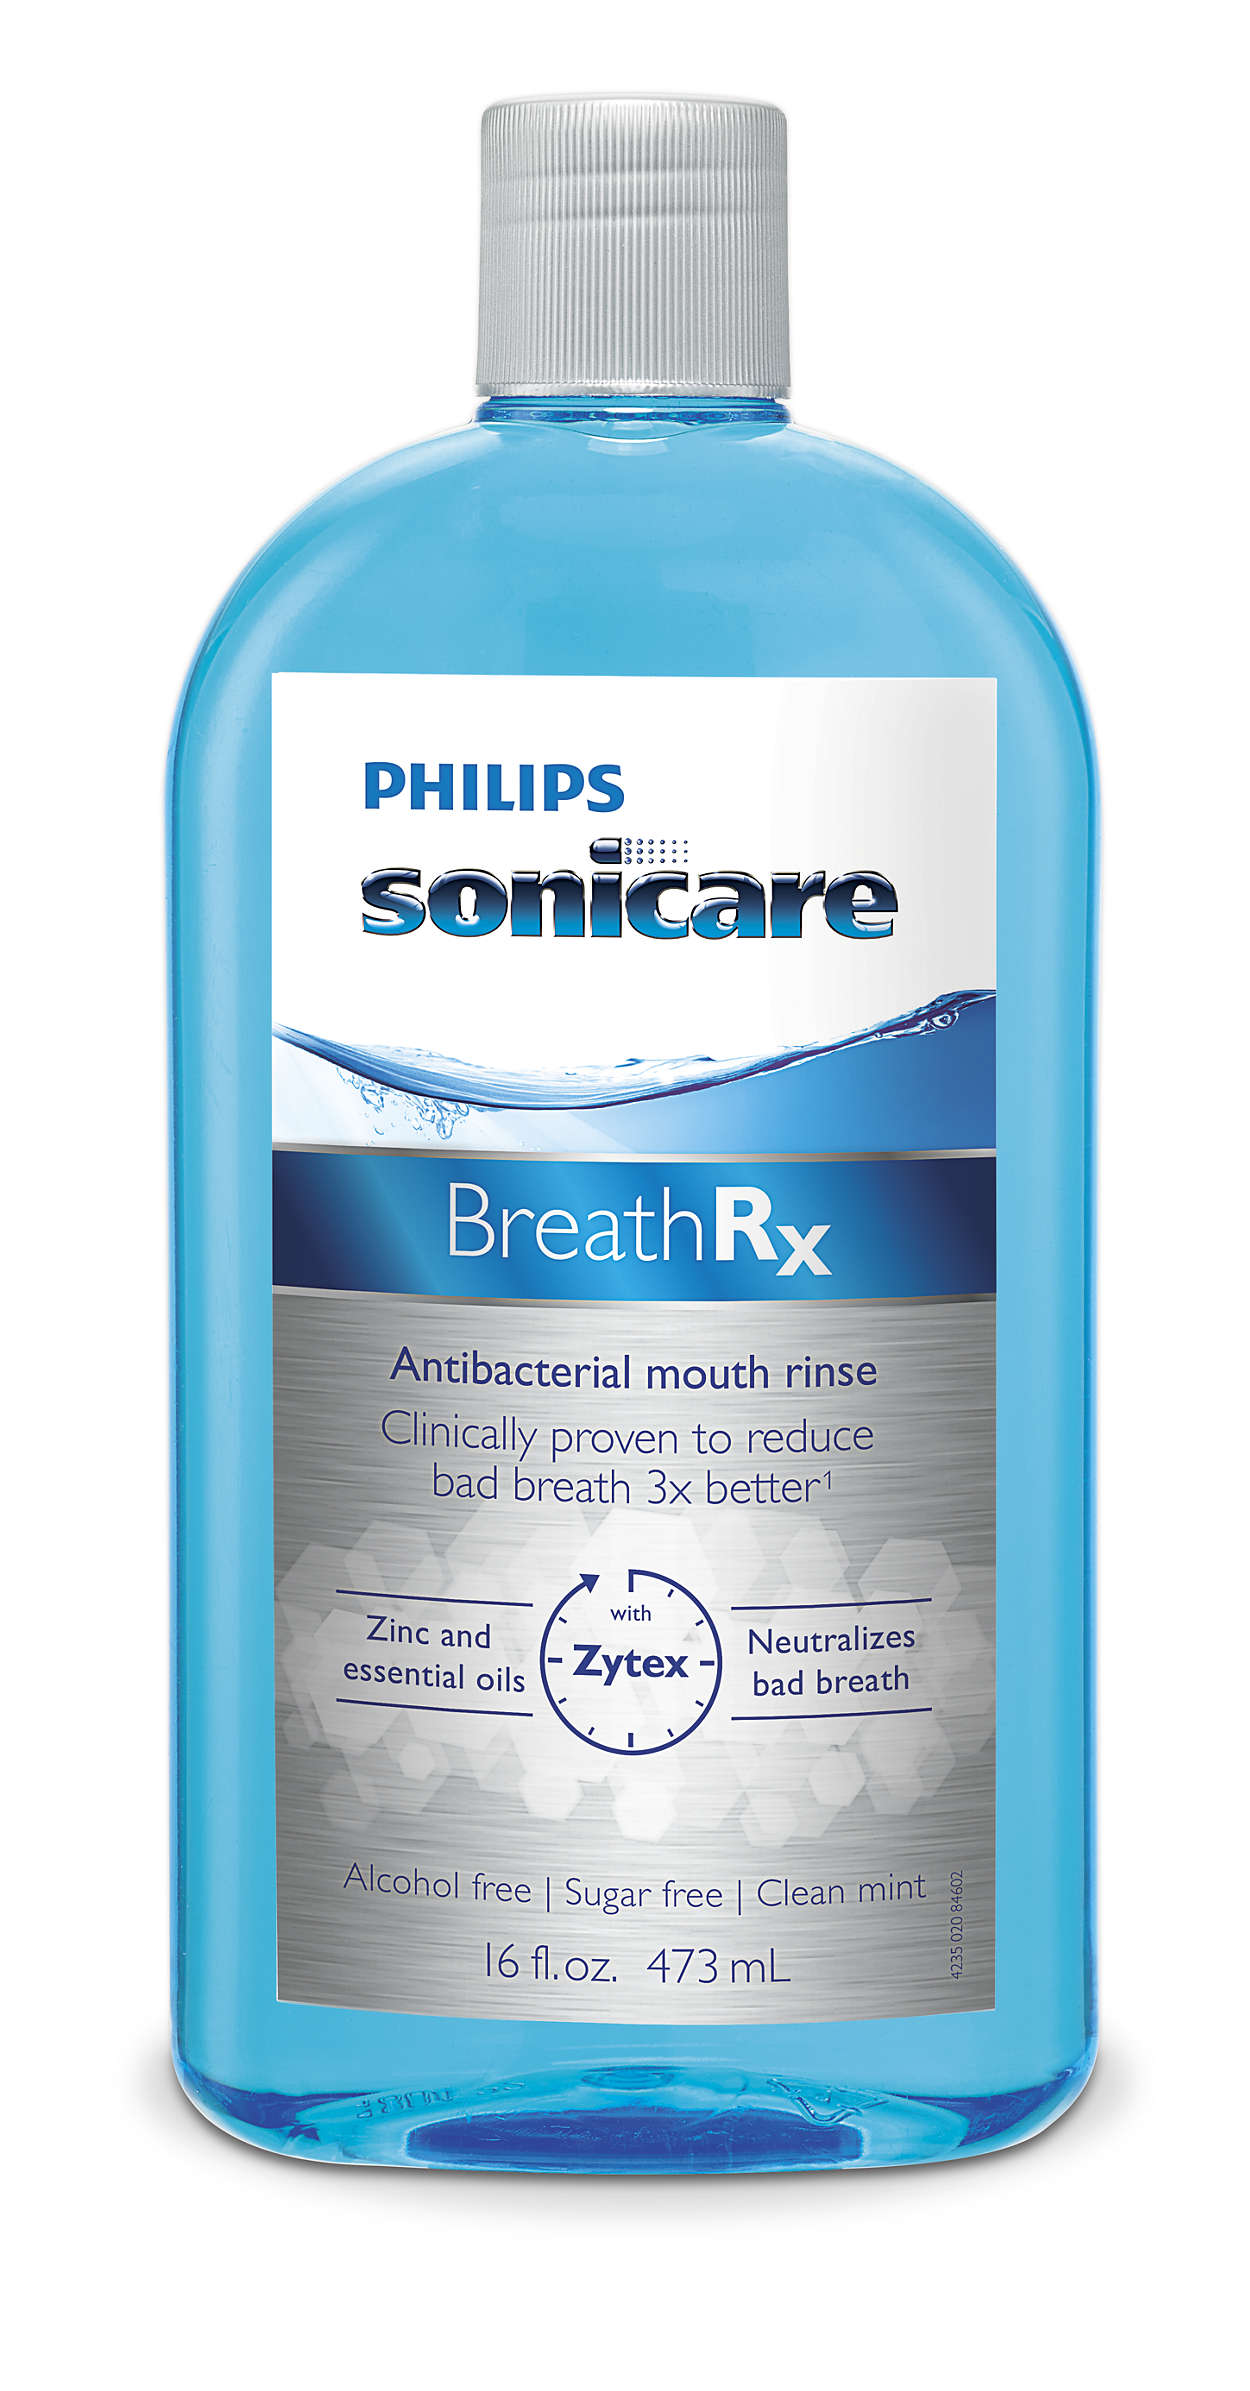 Clinically proven to reduce bad breath 3x better*